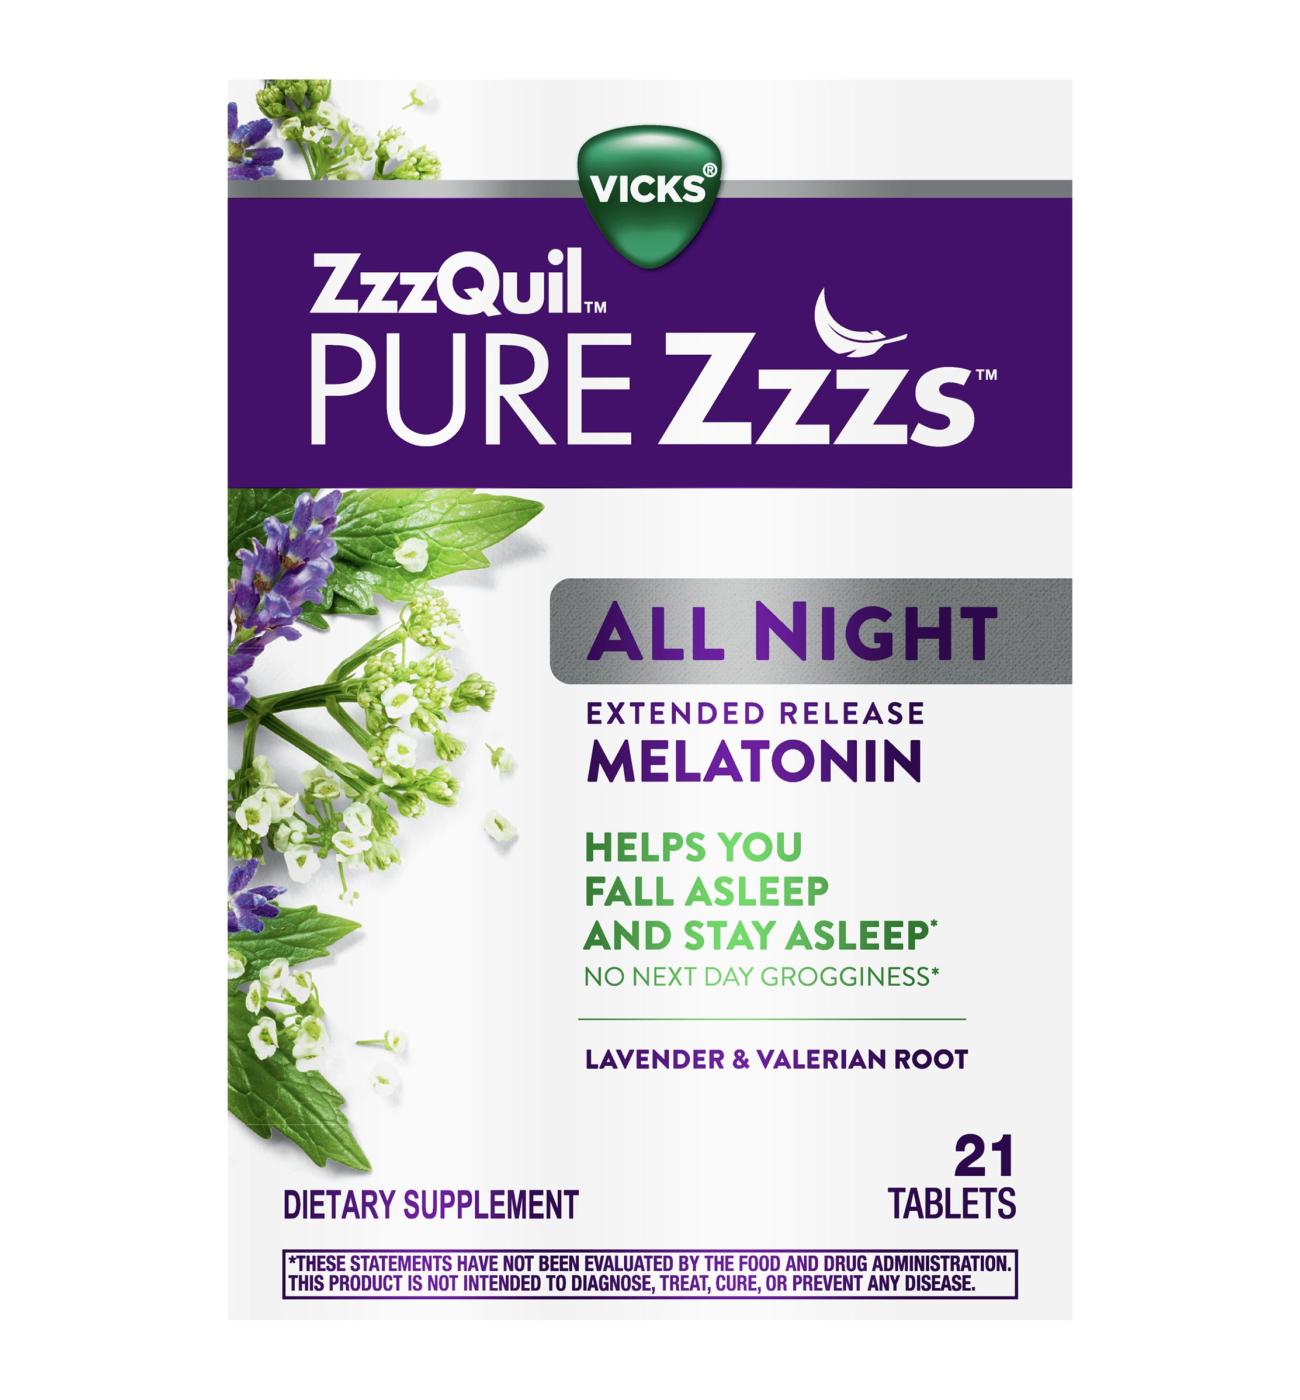 Vicks ZzzQuil Pure Zzzs All Night Extended Release Tablets; image 2 of 2